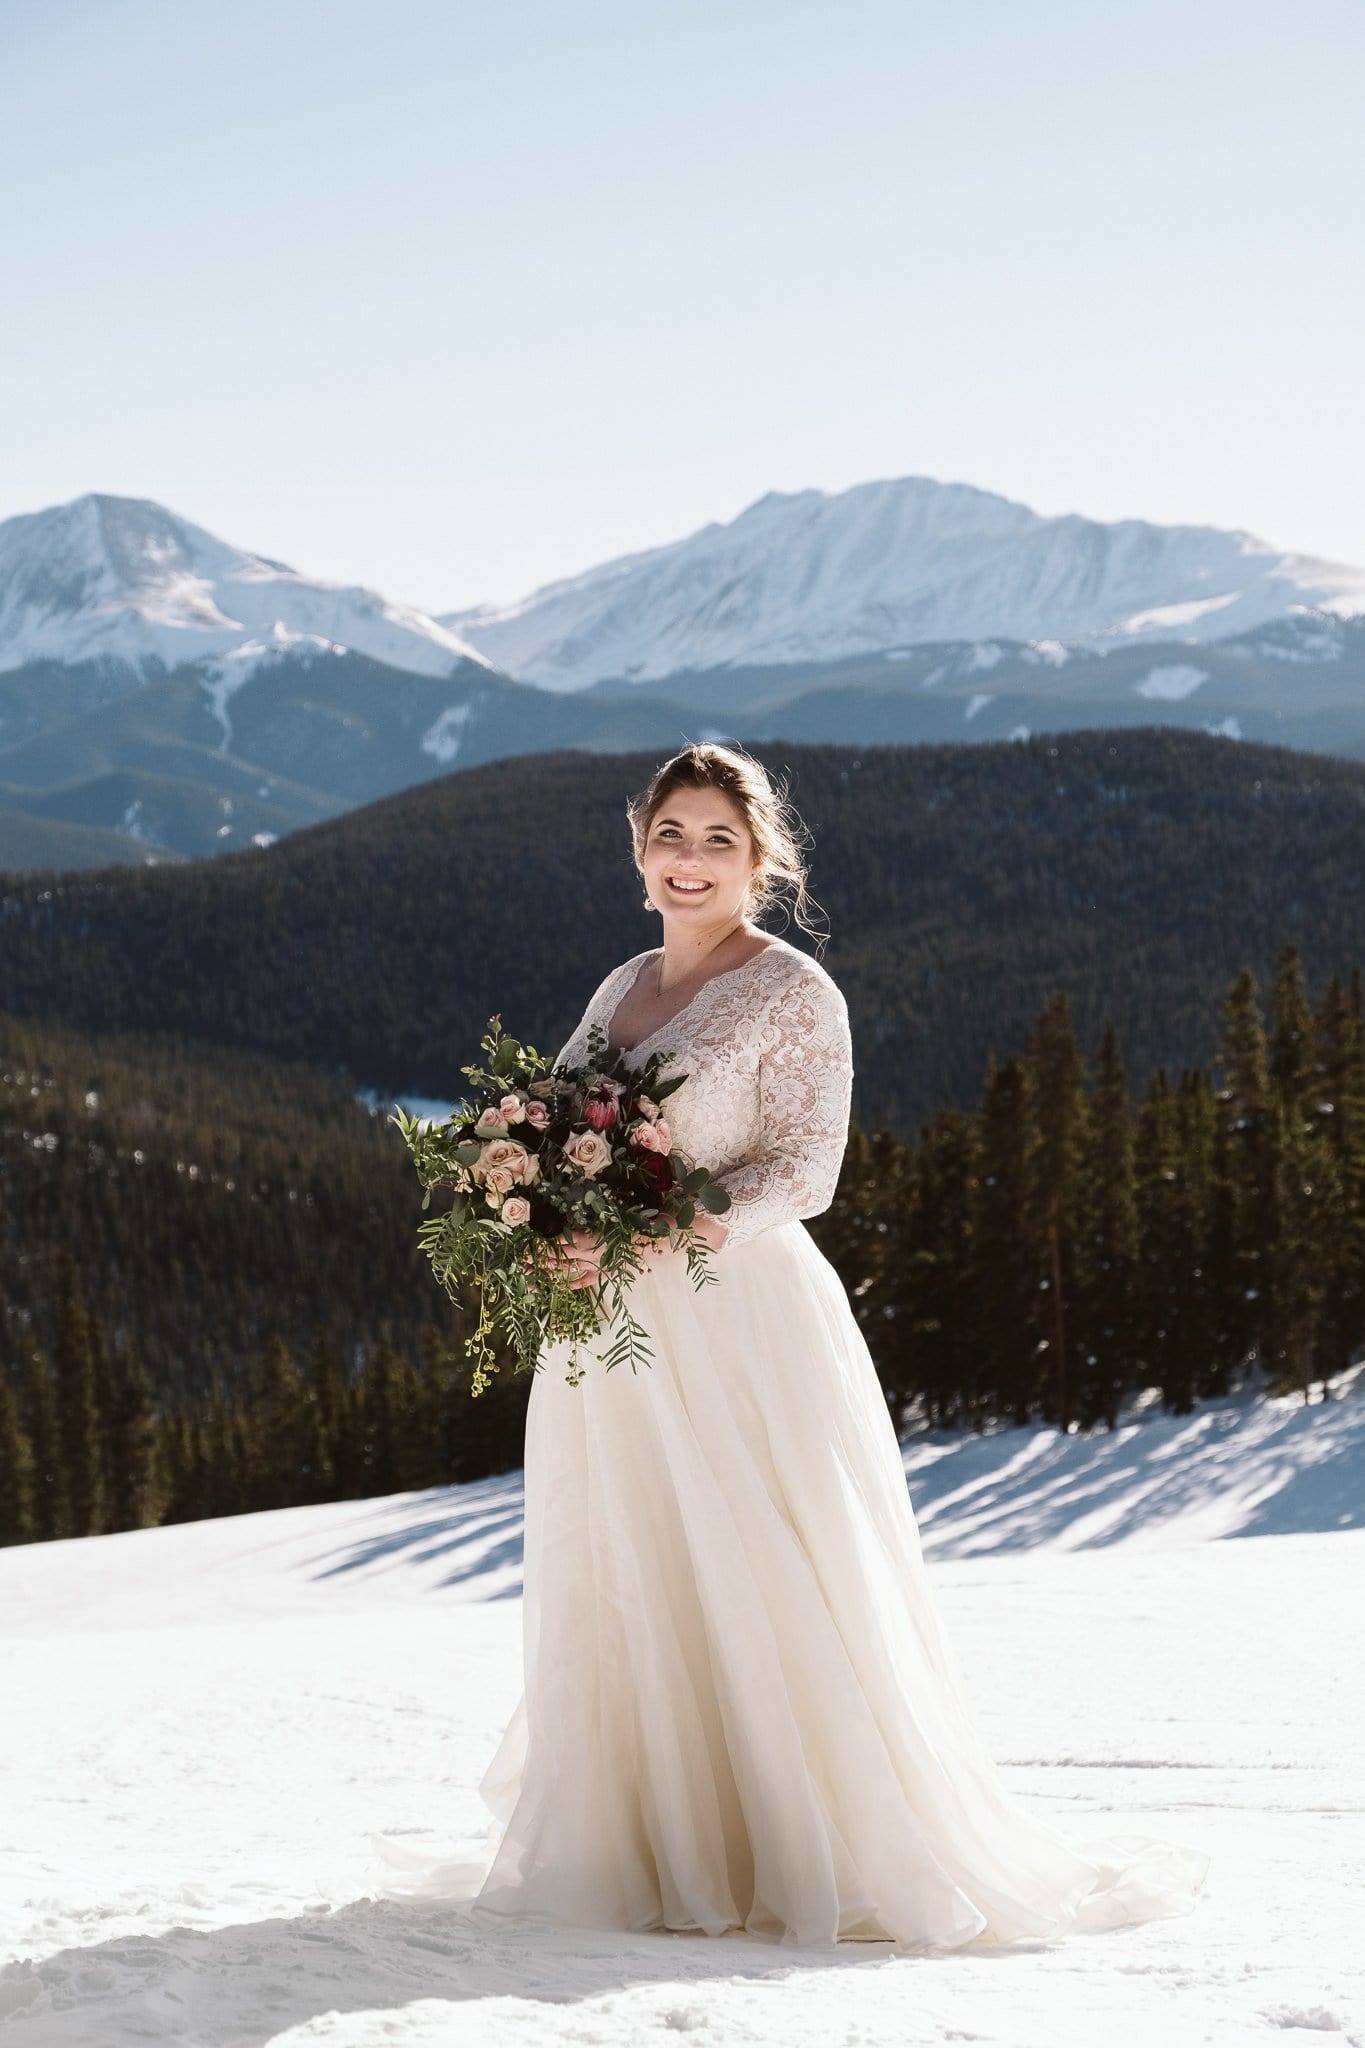 Bride wearing off-white long sleeve wedding dress at winter elopement in the snow.